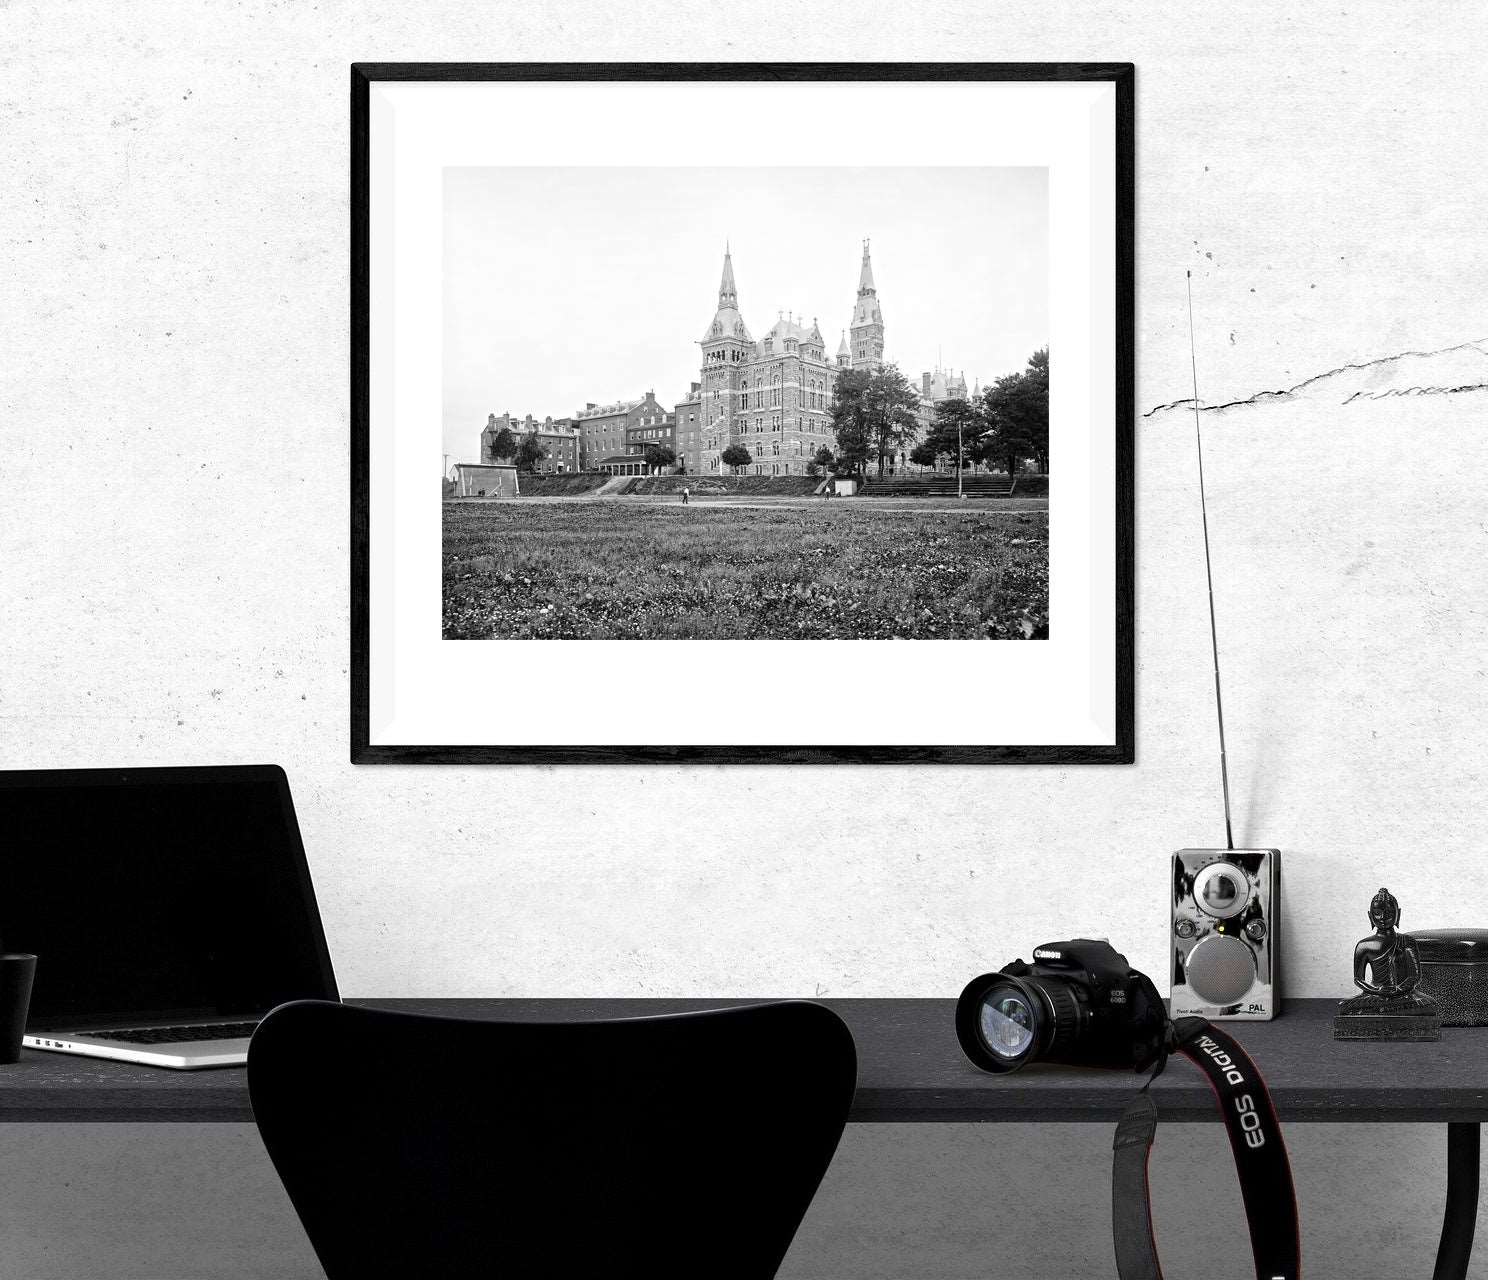 A framed paper print of a vintage photograph hanging on a wall above a desk